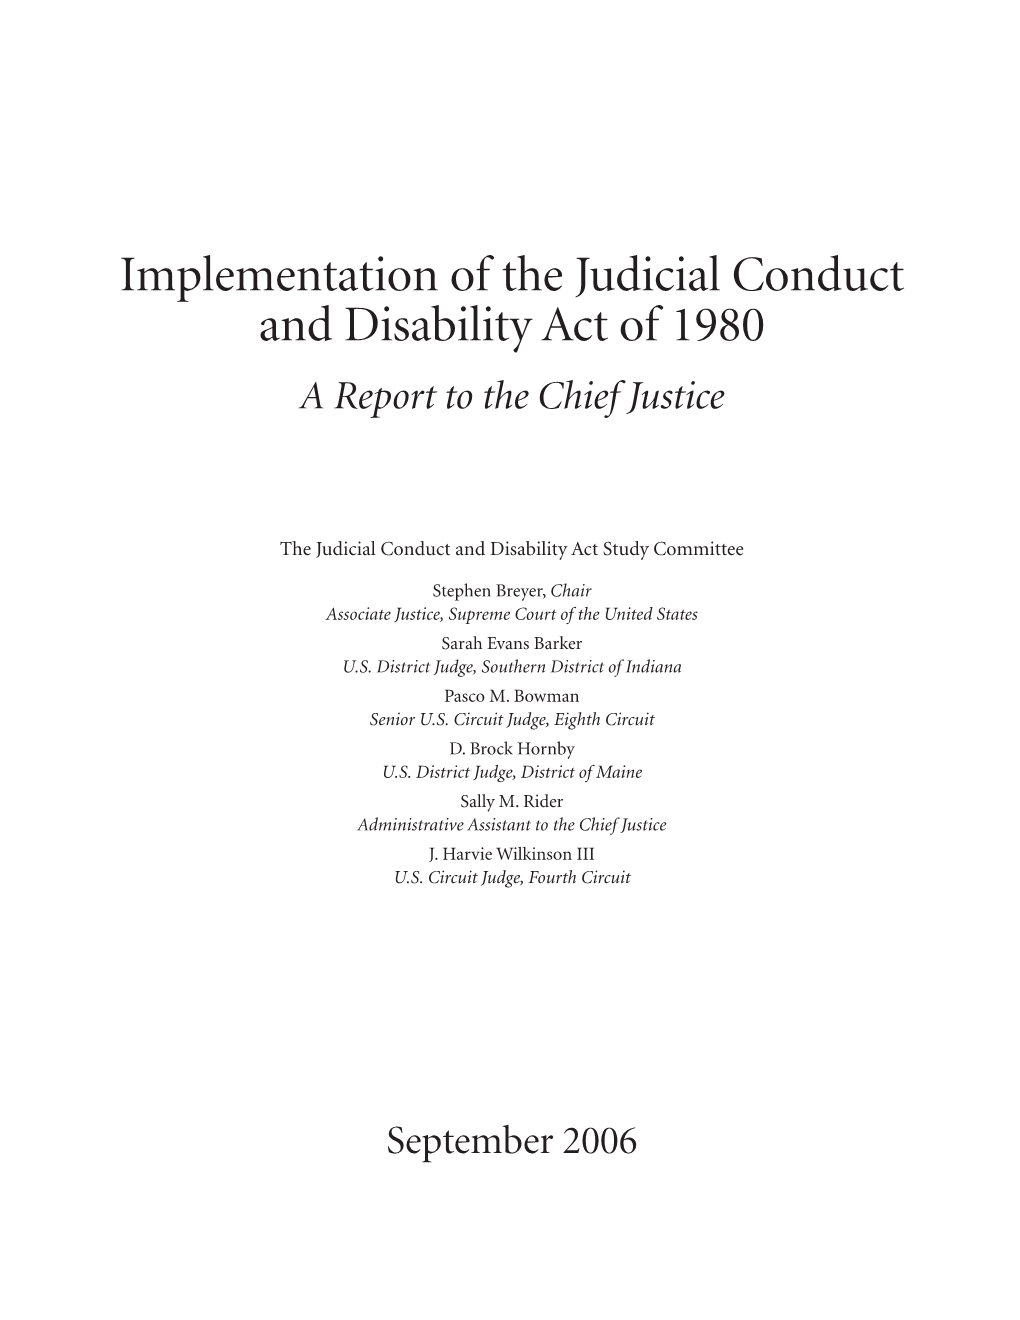 Implementation of the Judicial Conduct and Disability Act of 1980 a Report to the Chief Justice